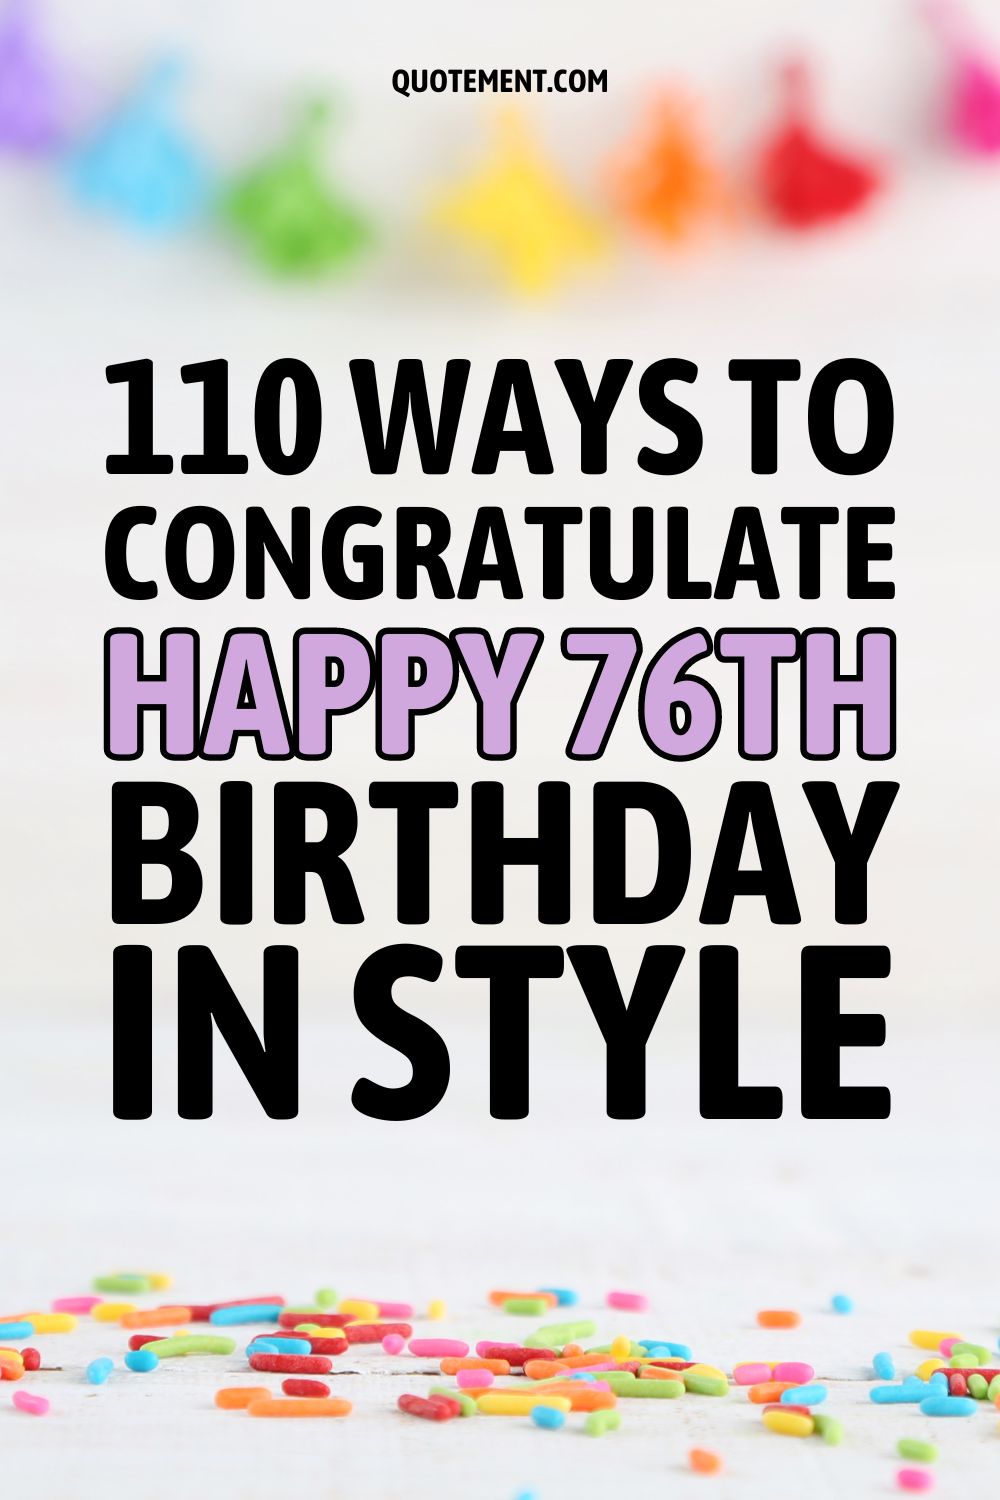 110 Ways To Congratulate Happy 76th Birthday In Style 